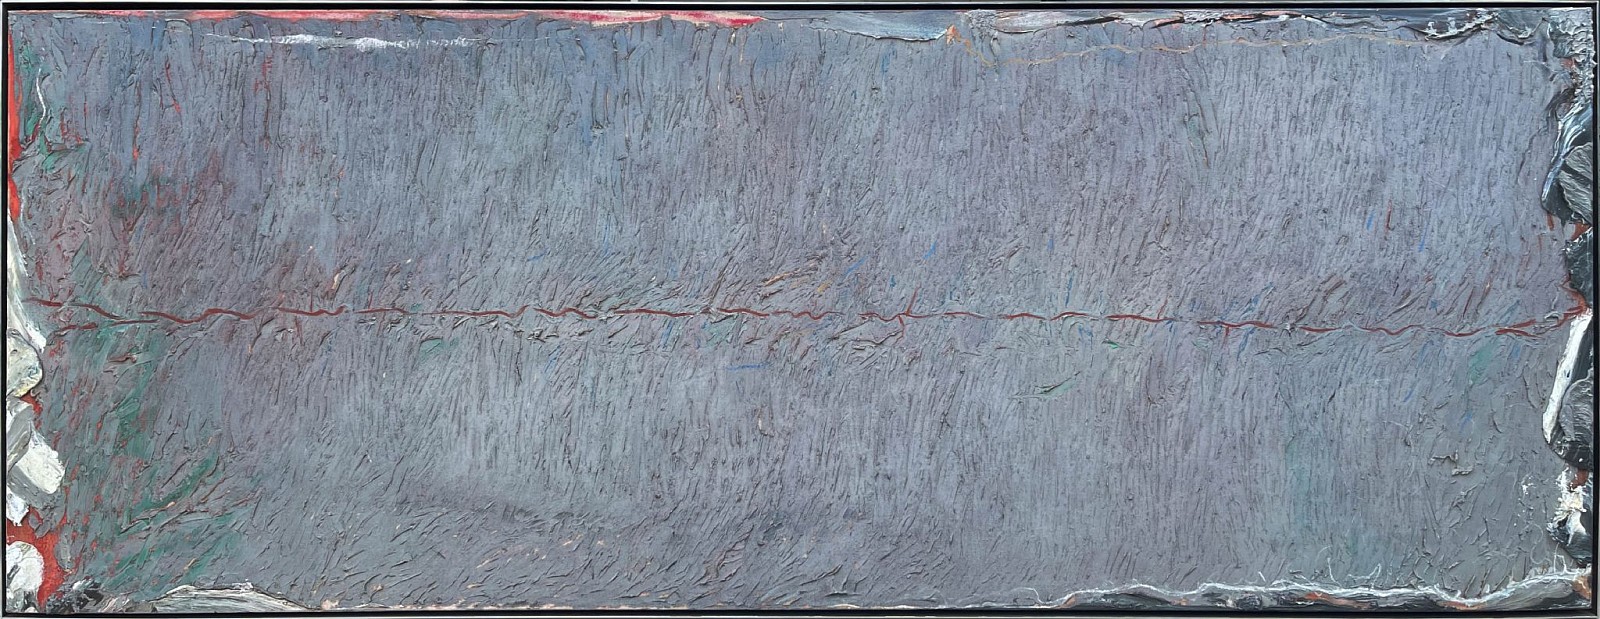 Stanley Boxer (Estate), Wreathedplungeofpoppyslather, 1978
Oil and mixed media on canvas, 36 x 96 in.
BOXE00192